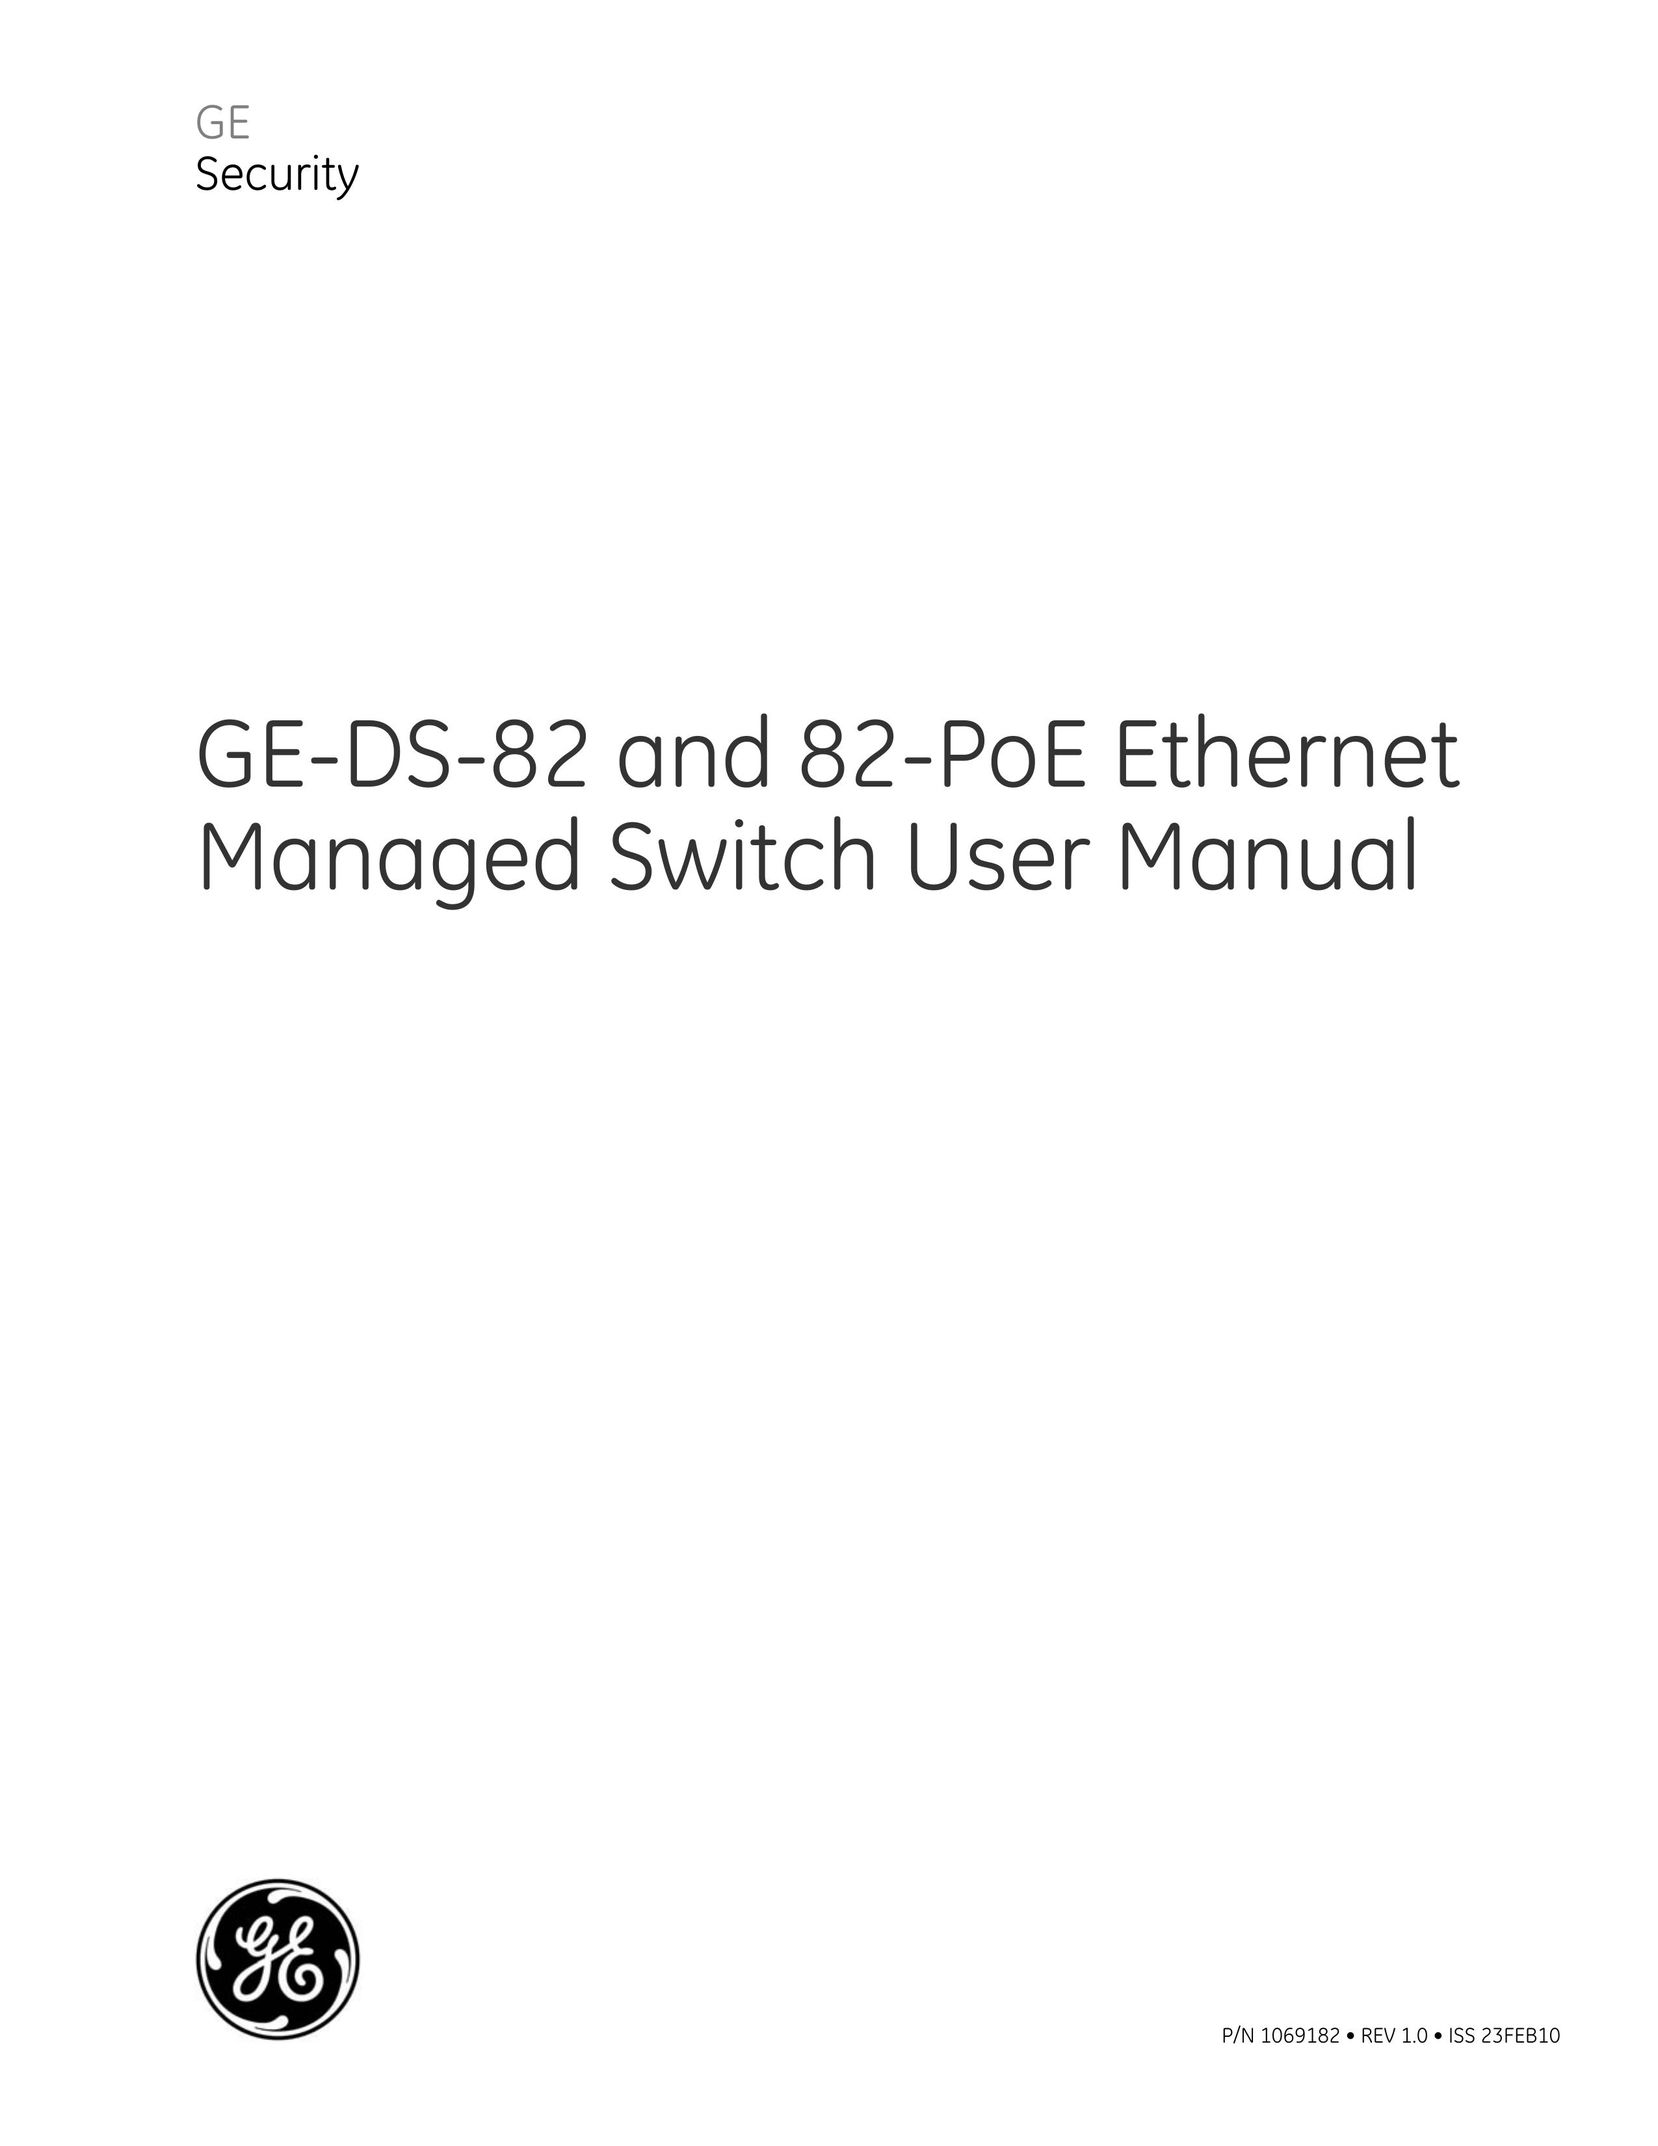 GE GE-DS-82 Switch User Manual